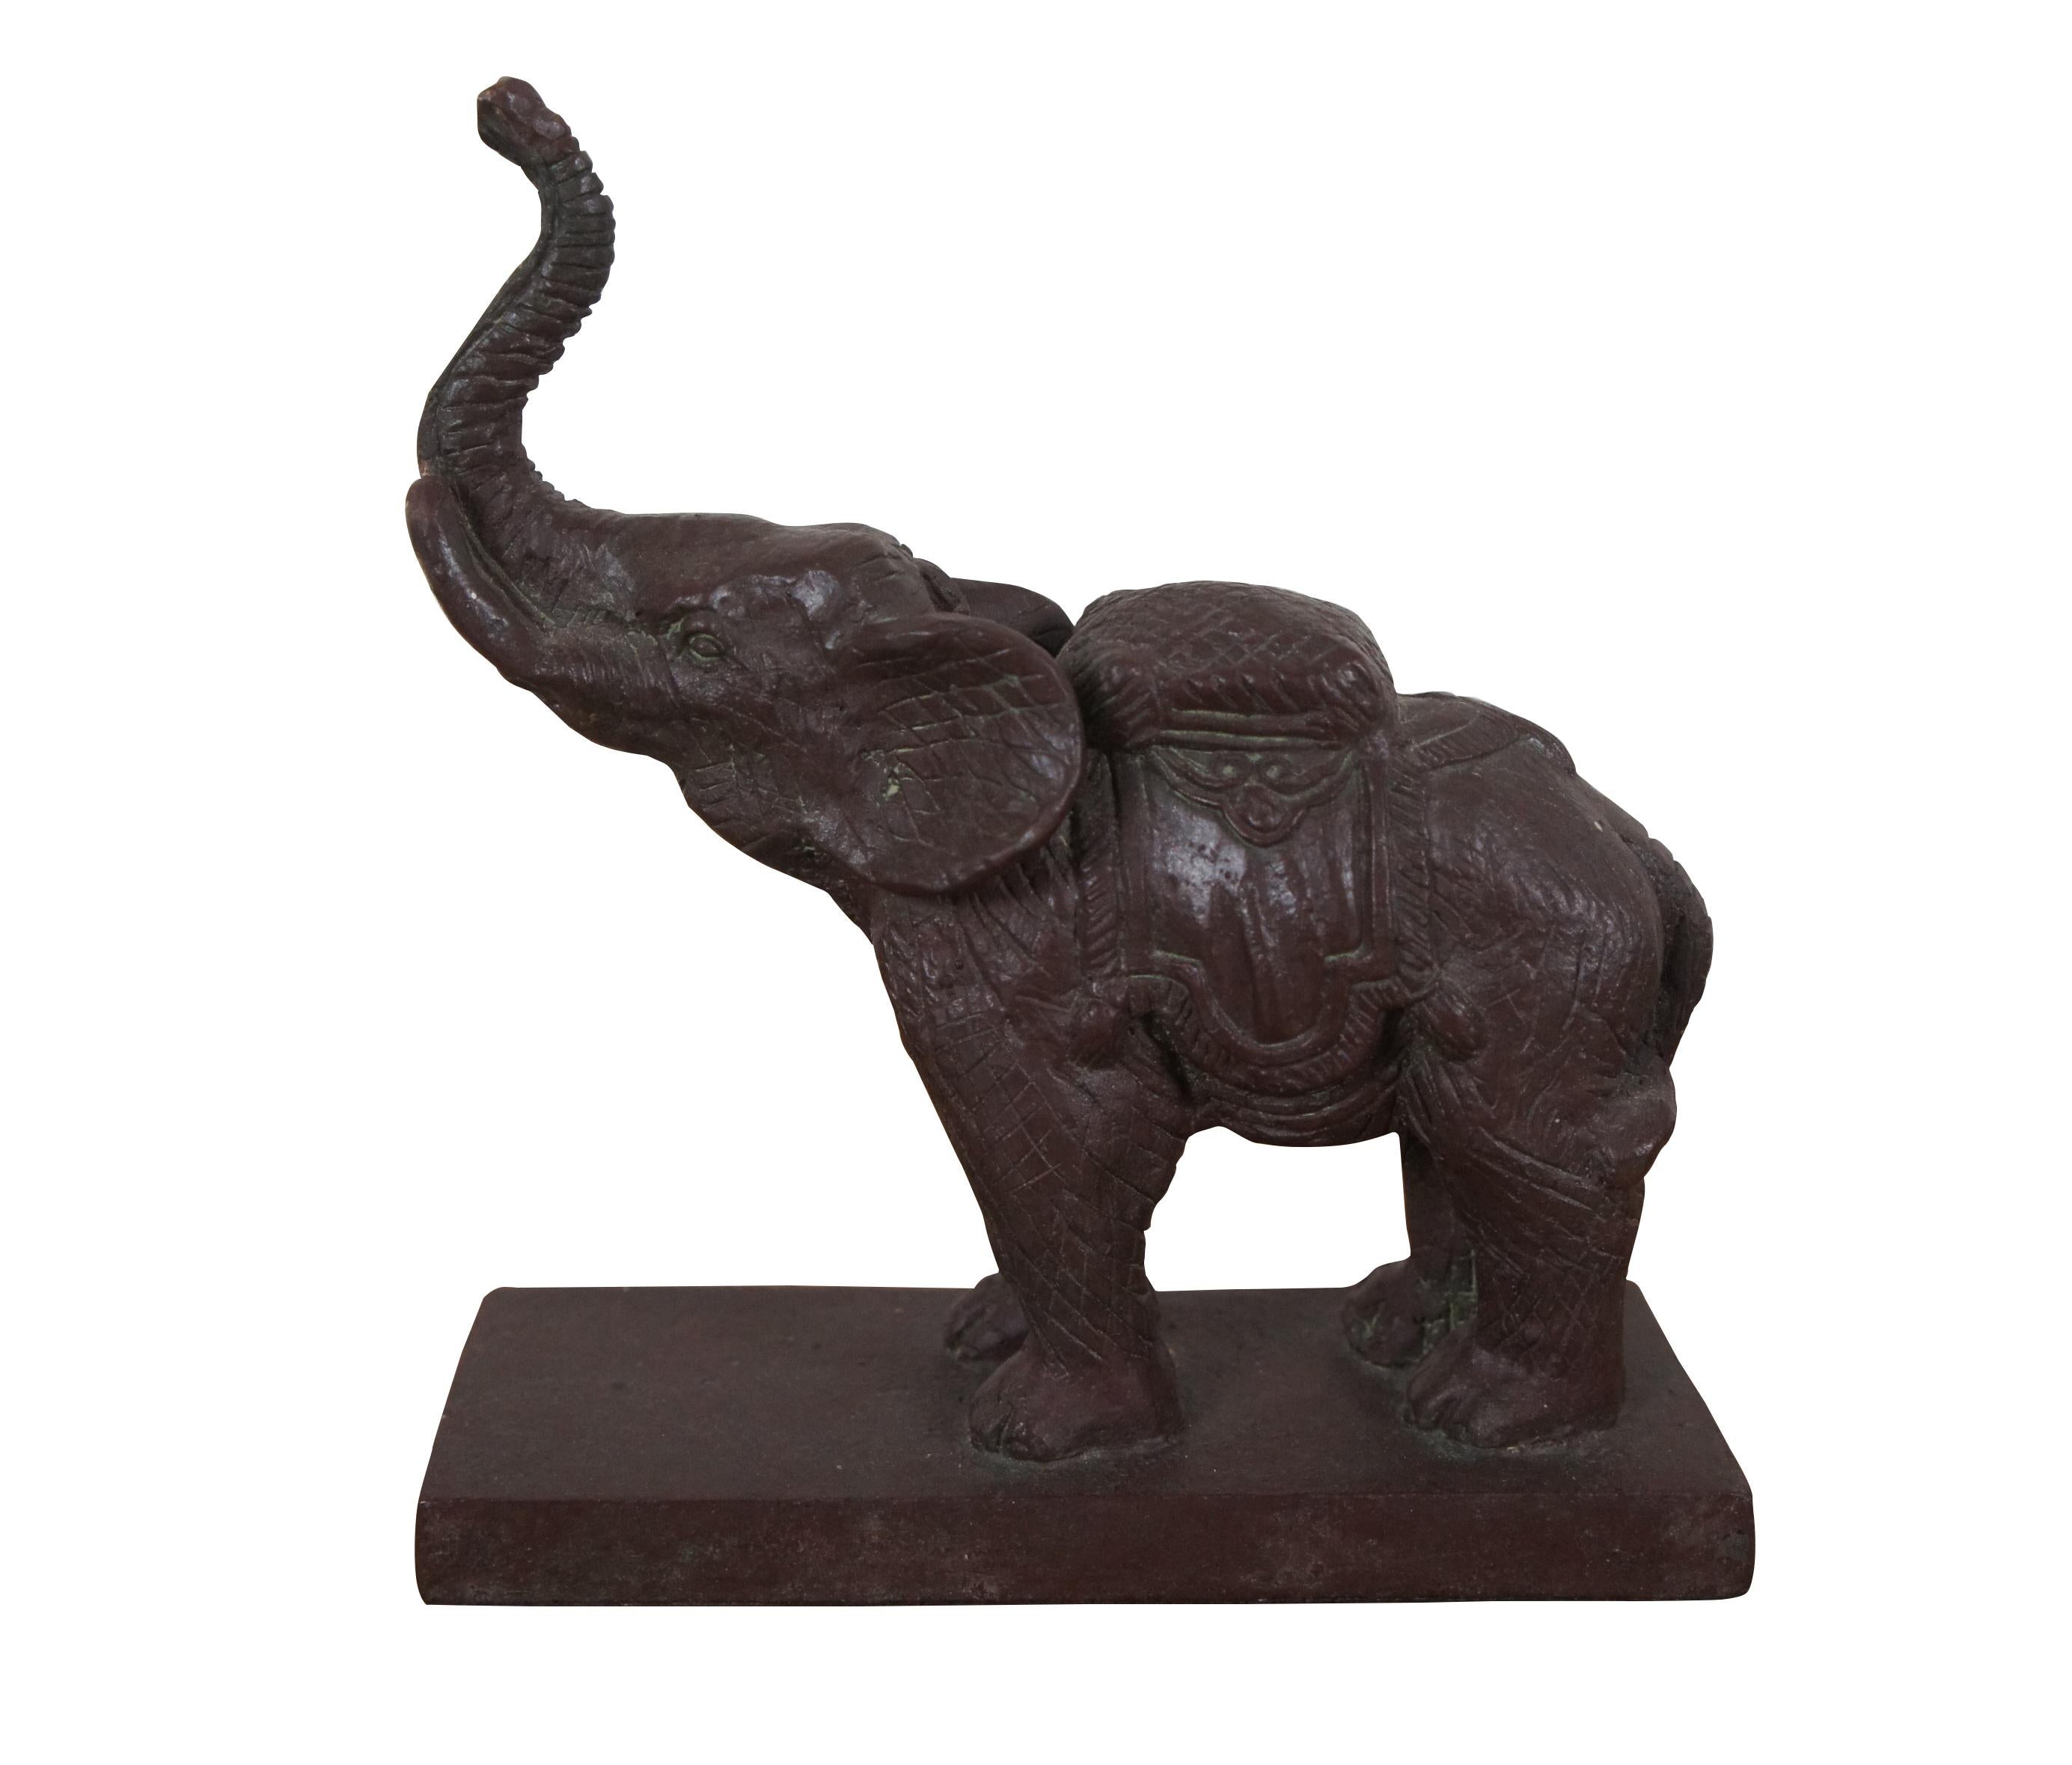 Pair of cast bronze bookends in the shape of Asian / Indian elephants saddled with fringed rug and cushion, trunks raised in the air for luck, set on a simple rectangular base. Deep red / burgundy finish.

Dimensions:
6.5